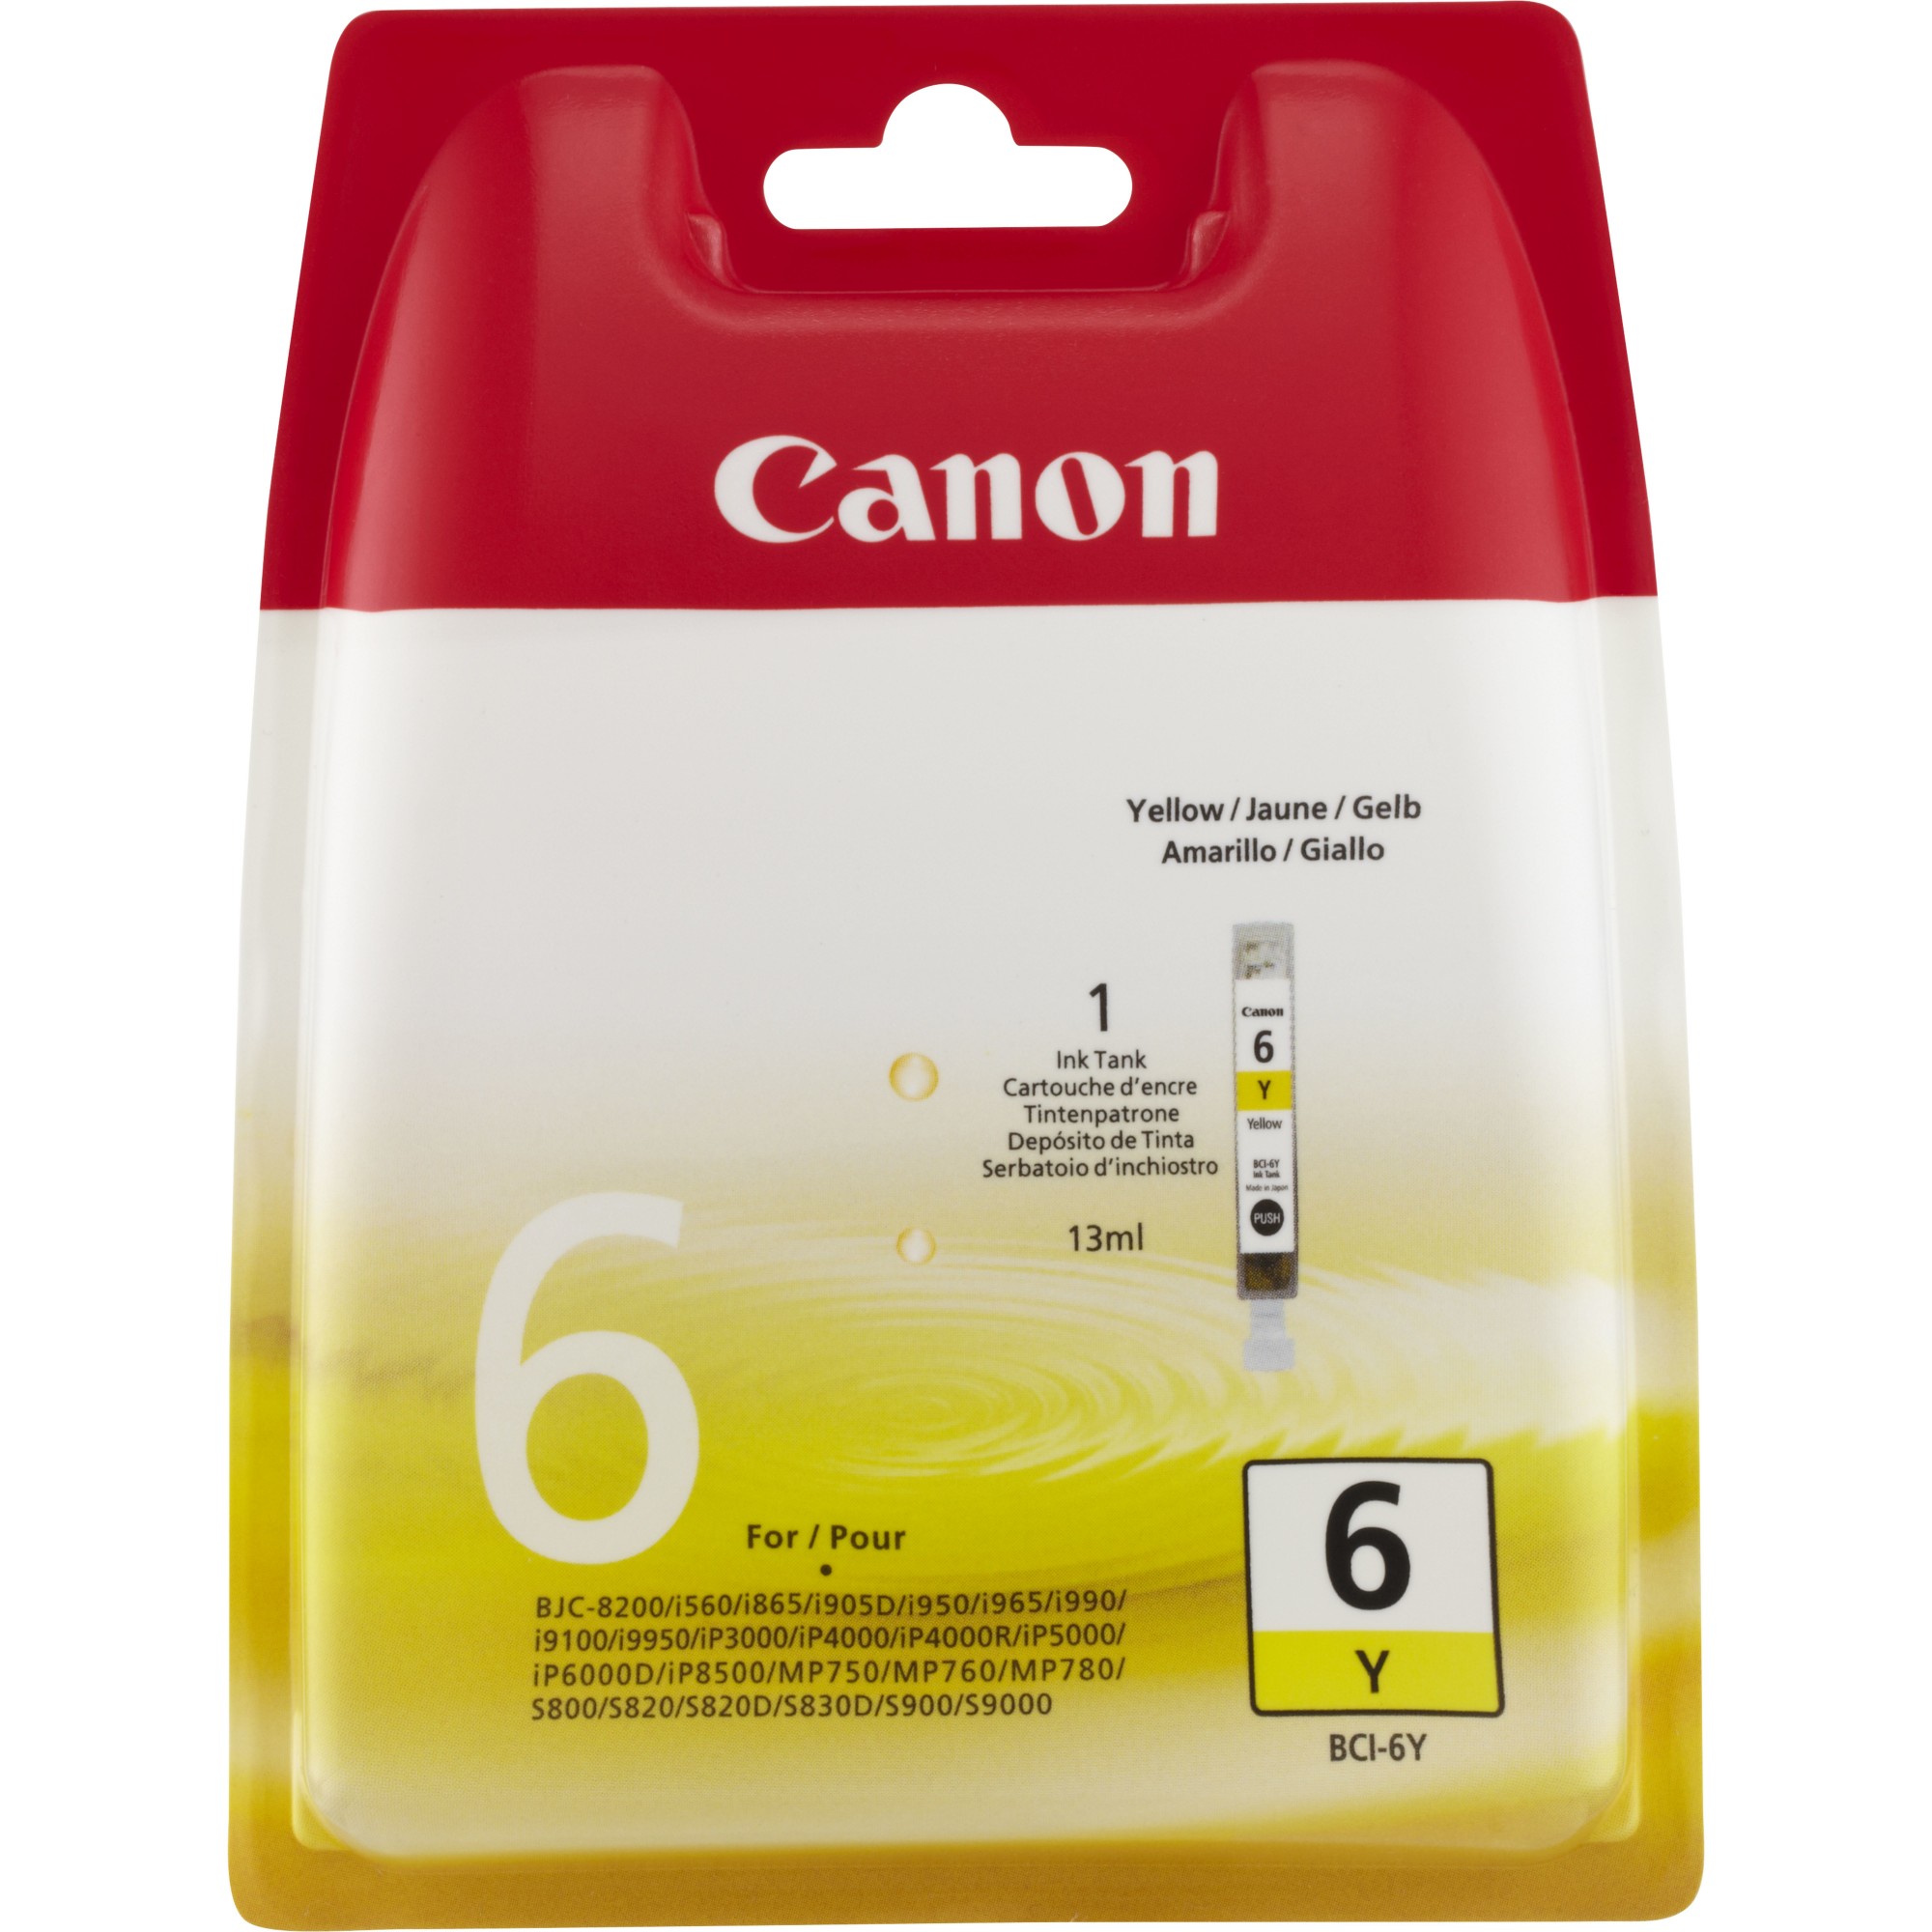 Canon 4708A002/BCI-6Y Ink cartridge yellow, 210 pages/5% 13ml for Canon BJC 8200/I 560/I 990/I 9900/S 800